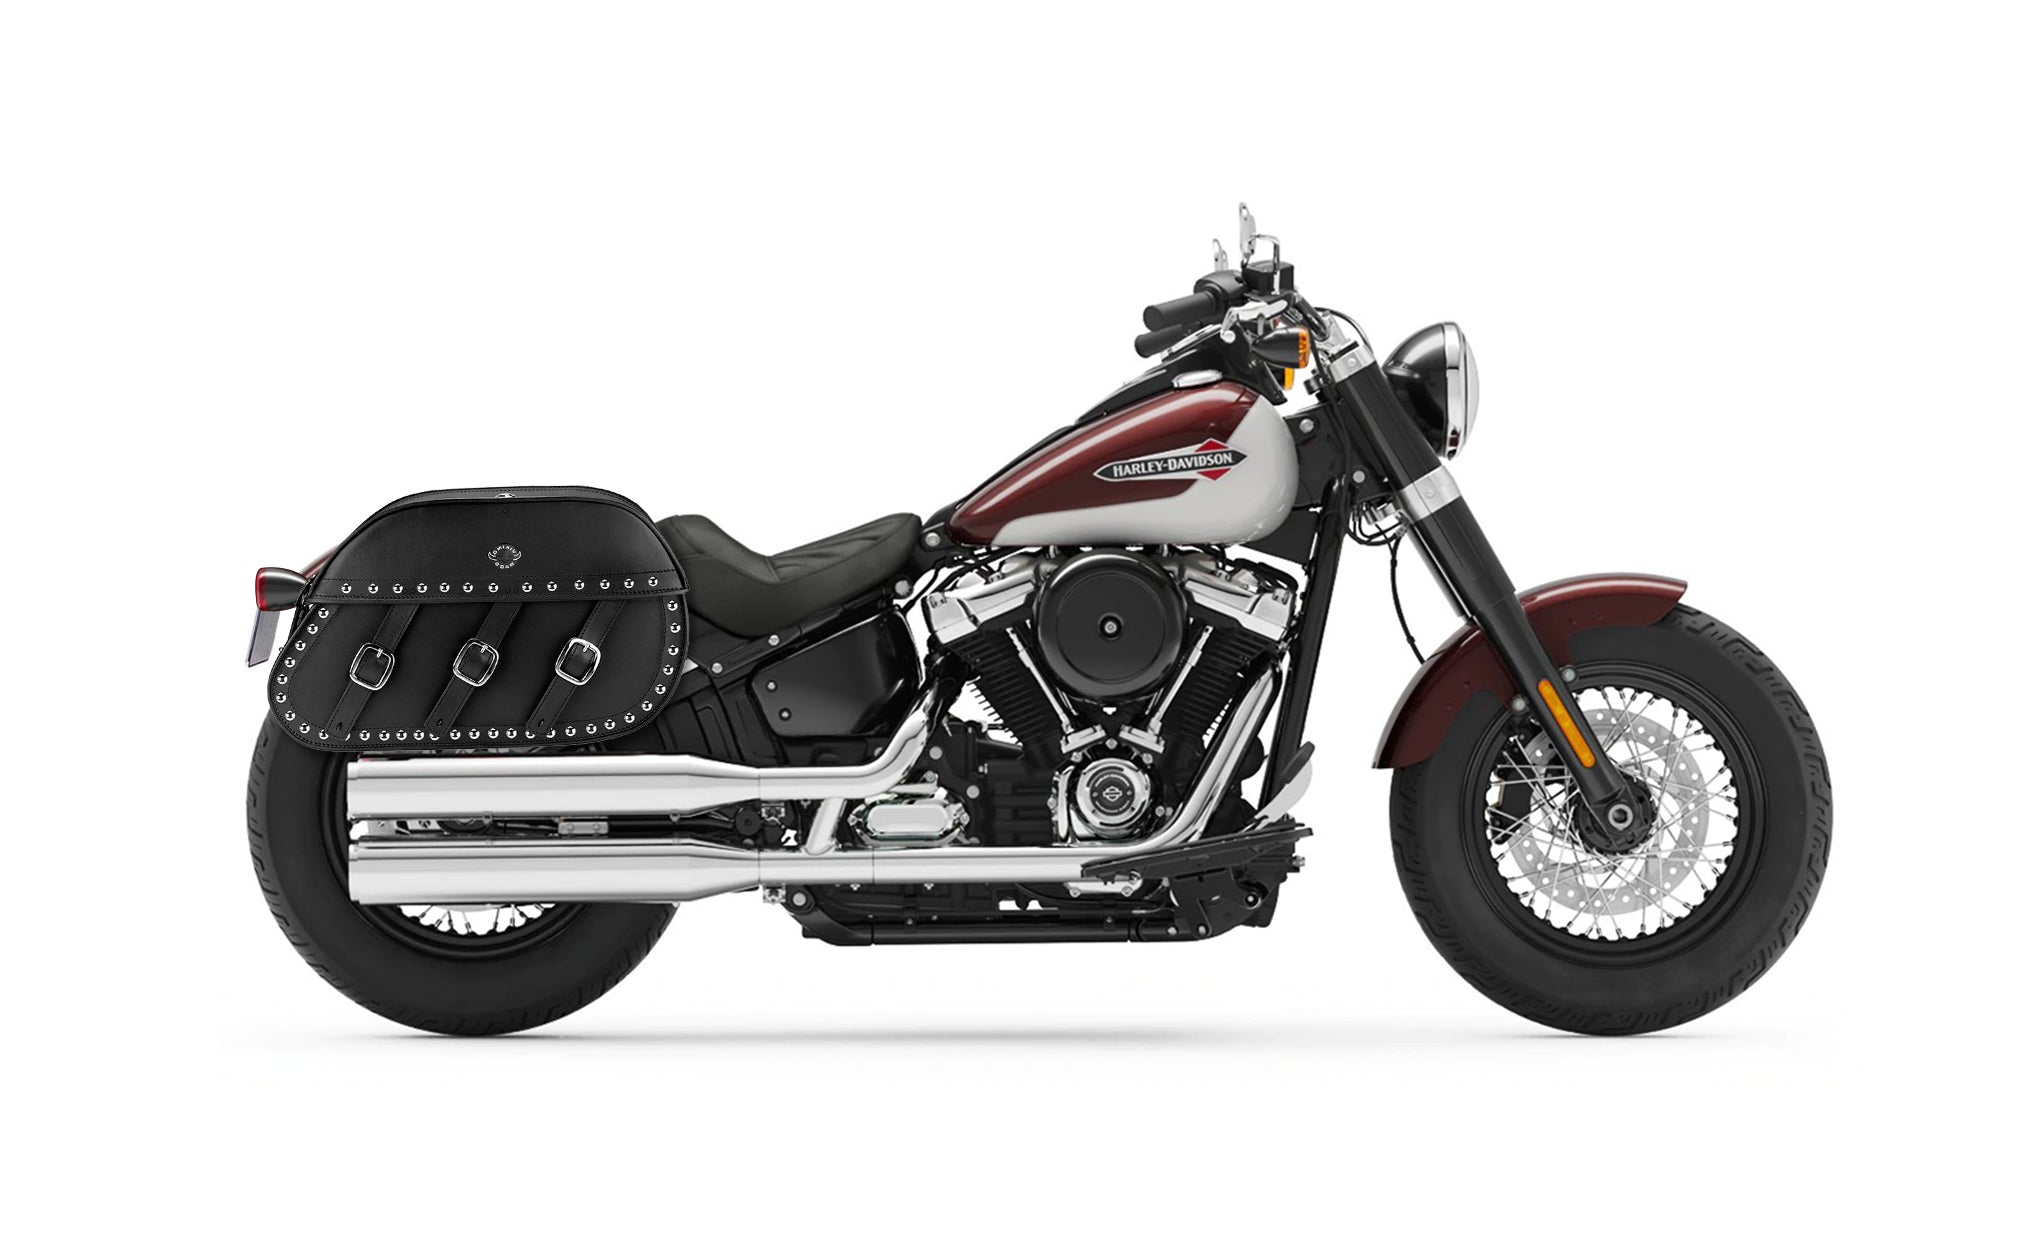 34L - Trianon Extra Large Studded Leather Saddlebags for Harley Softail Slim FLSL on Bike Photo @expand